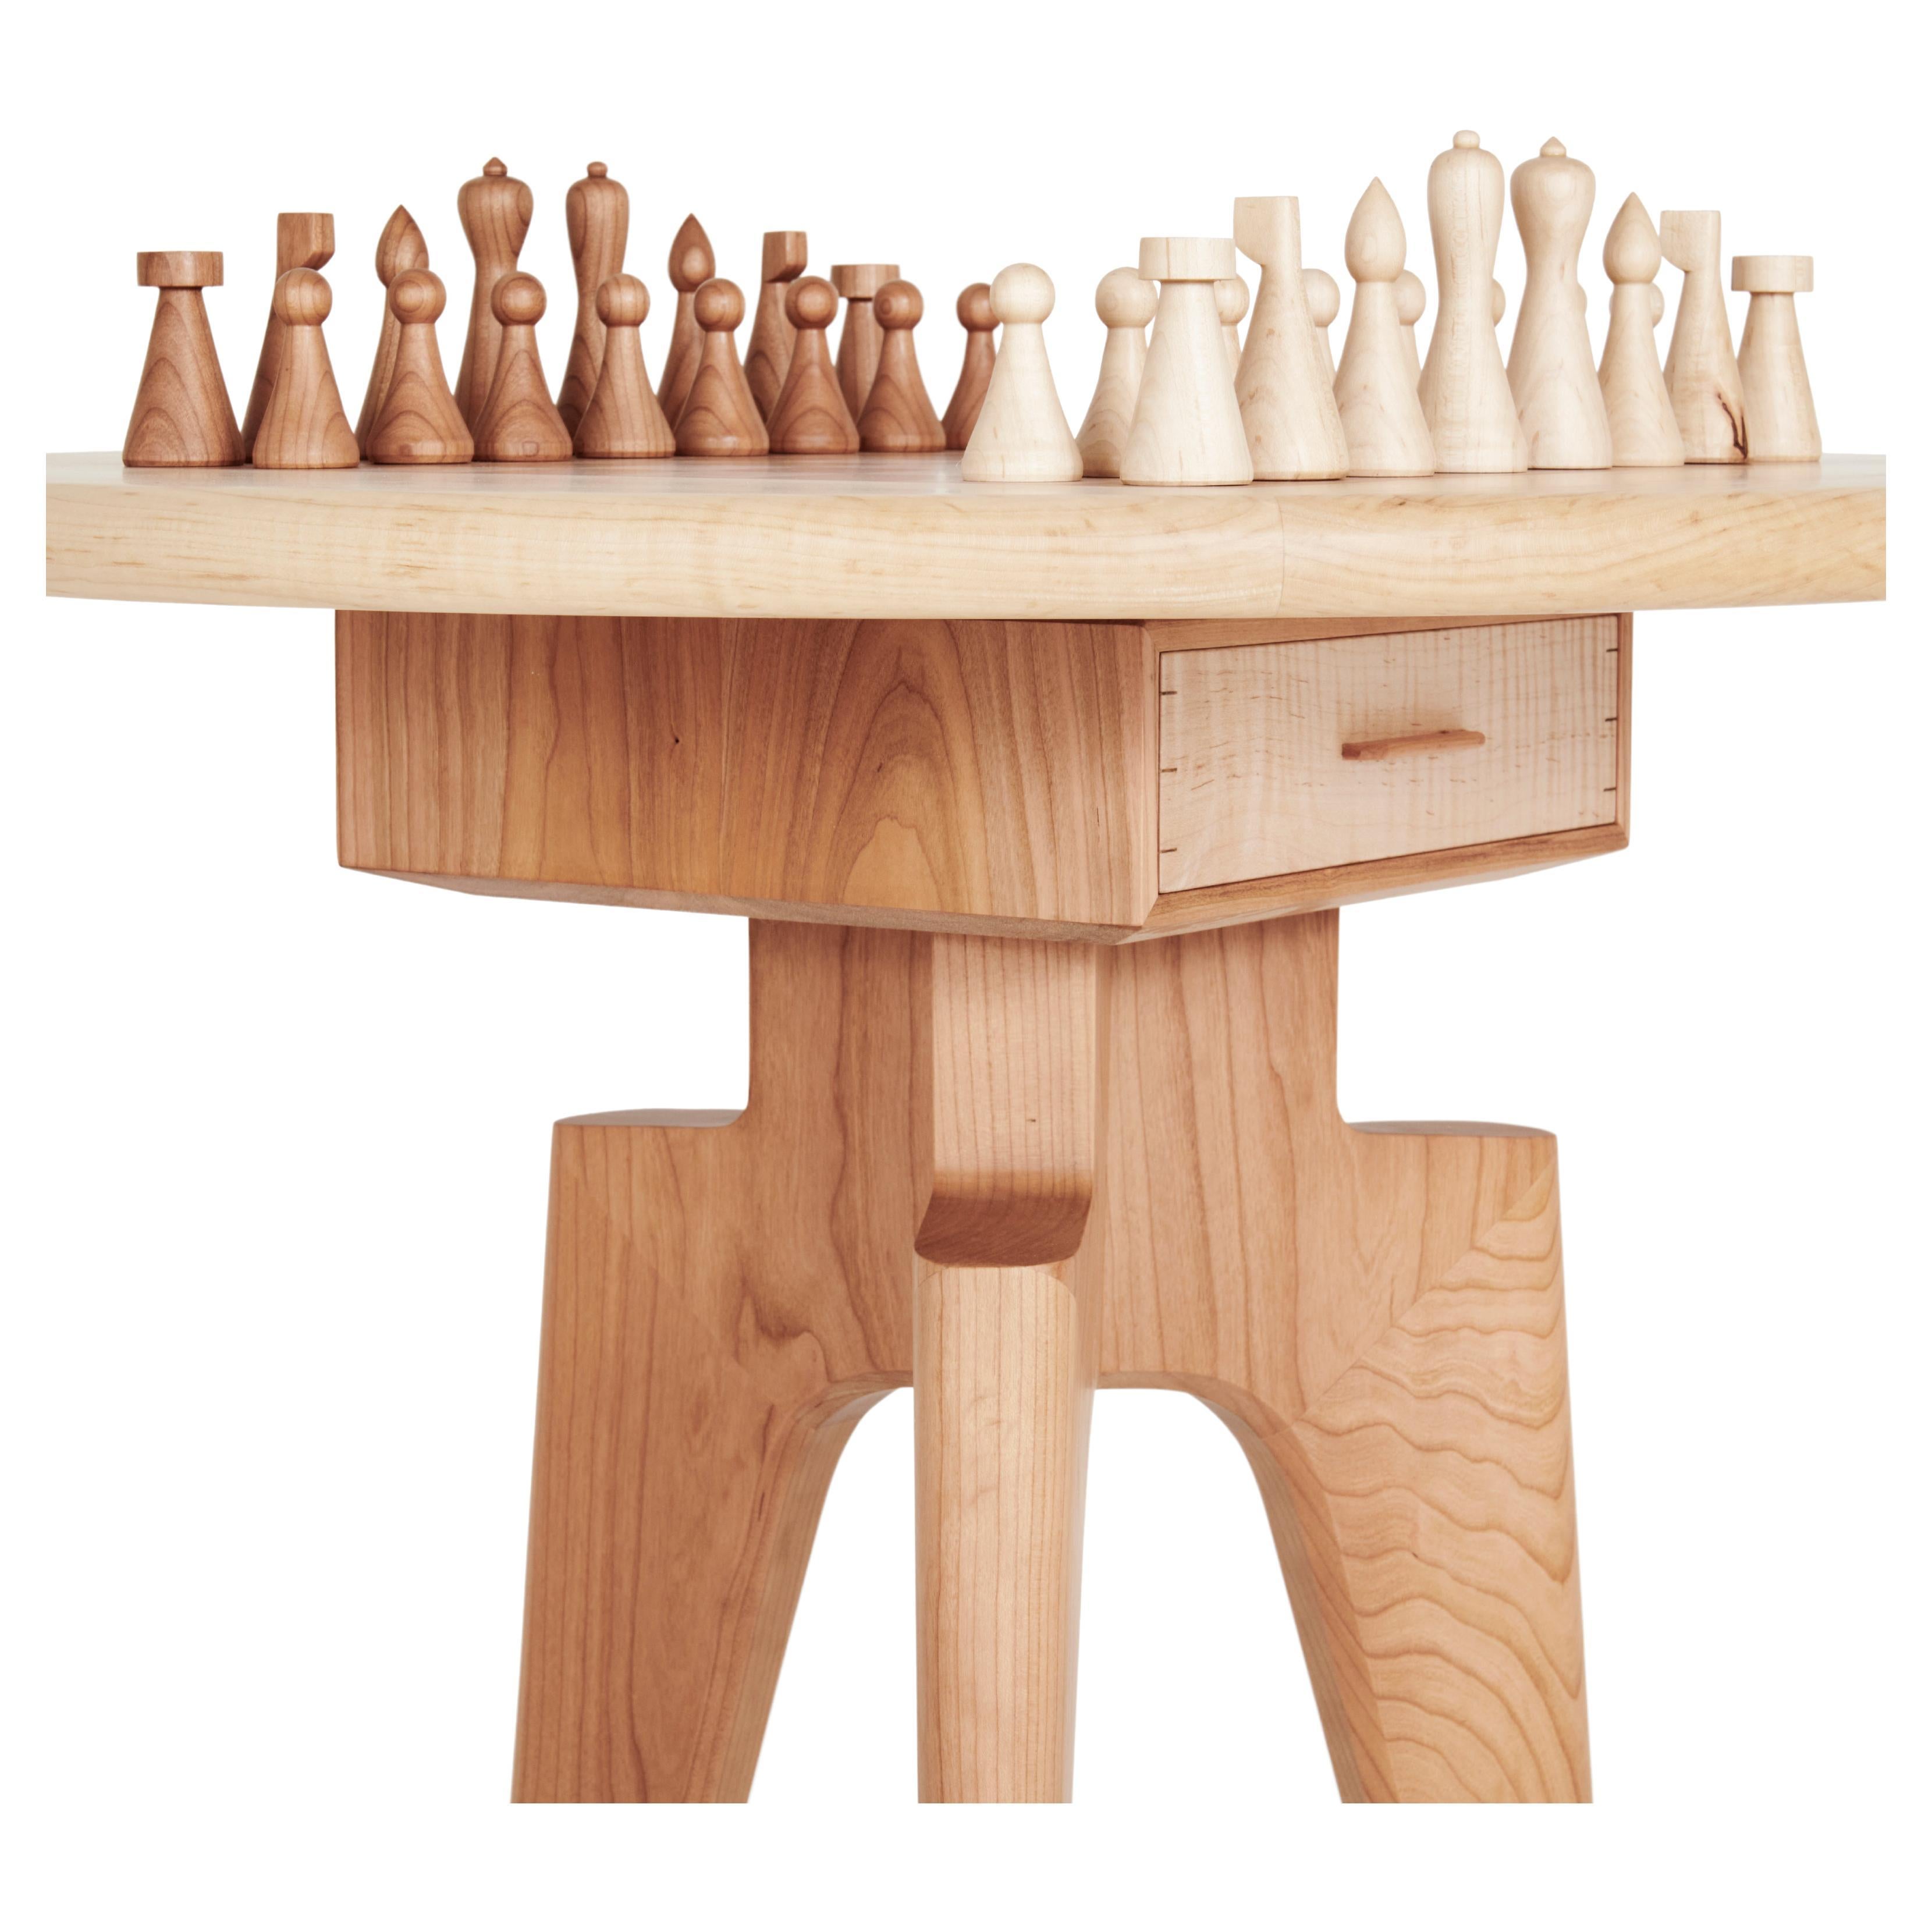 Wood Porn - A Wildly Classy Chess Set (Cherry and Maple) For Sale